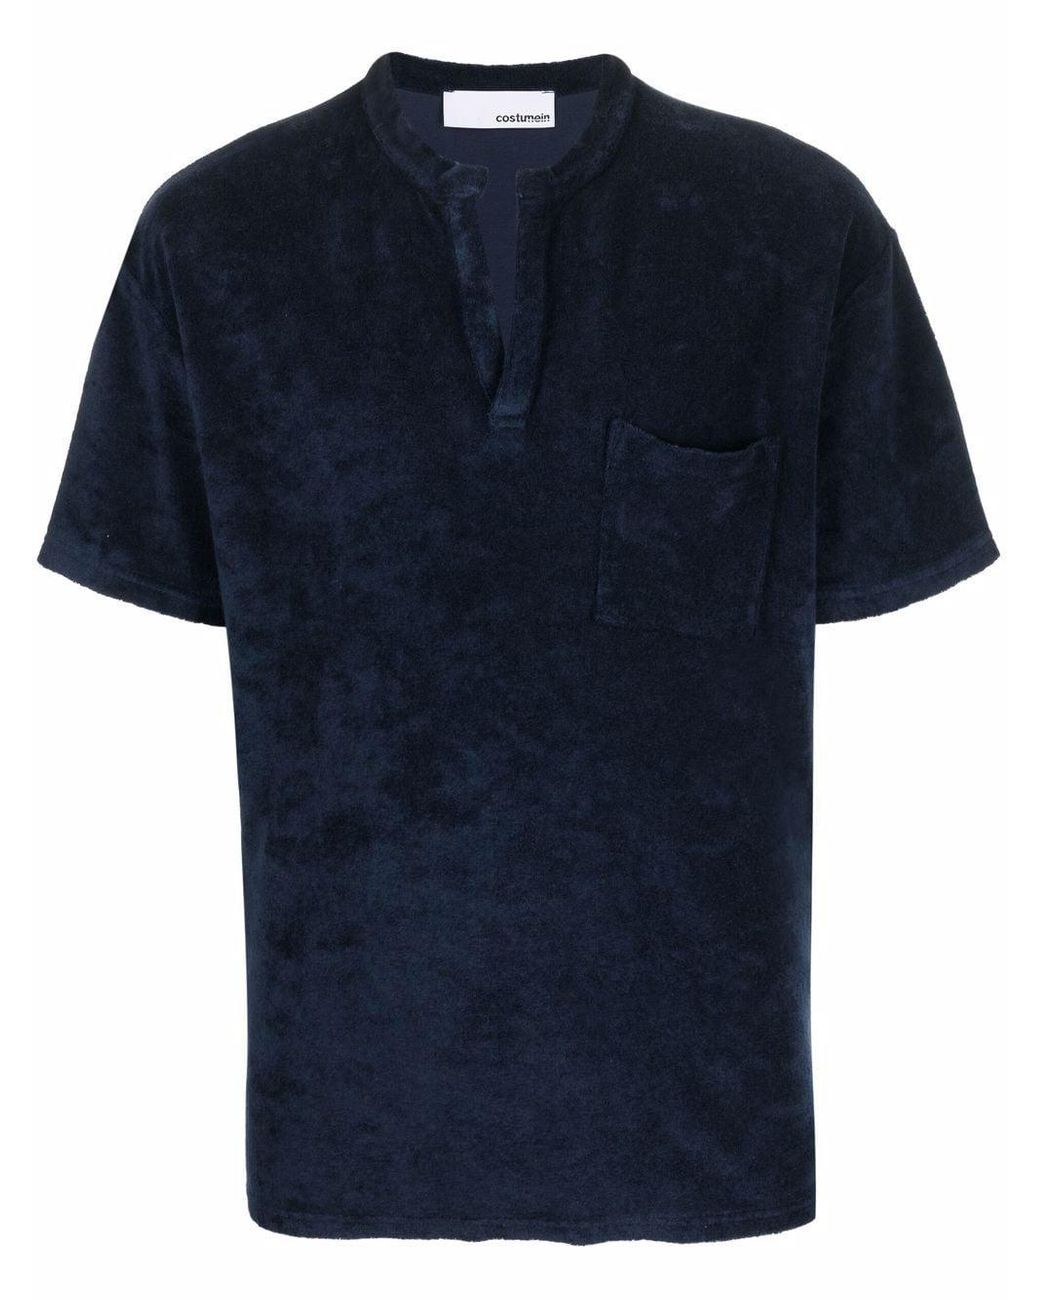 Costumein Cotton Terry-cloth T-shirt in Blue for Men | Lyst